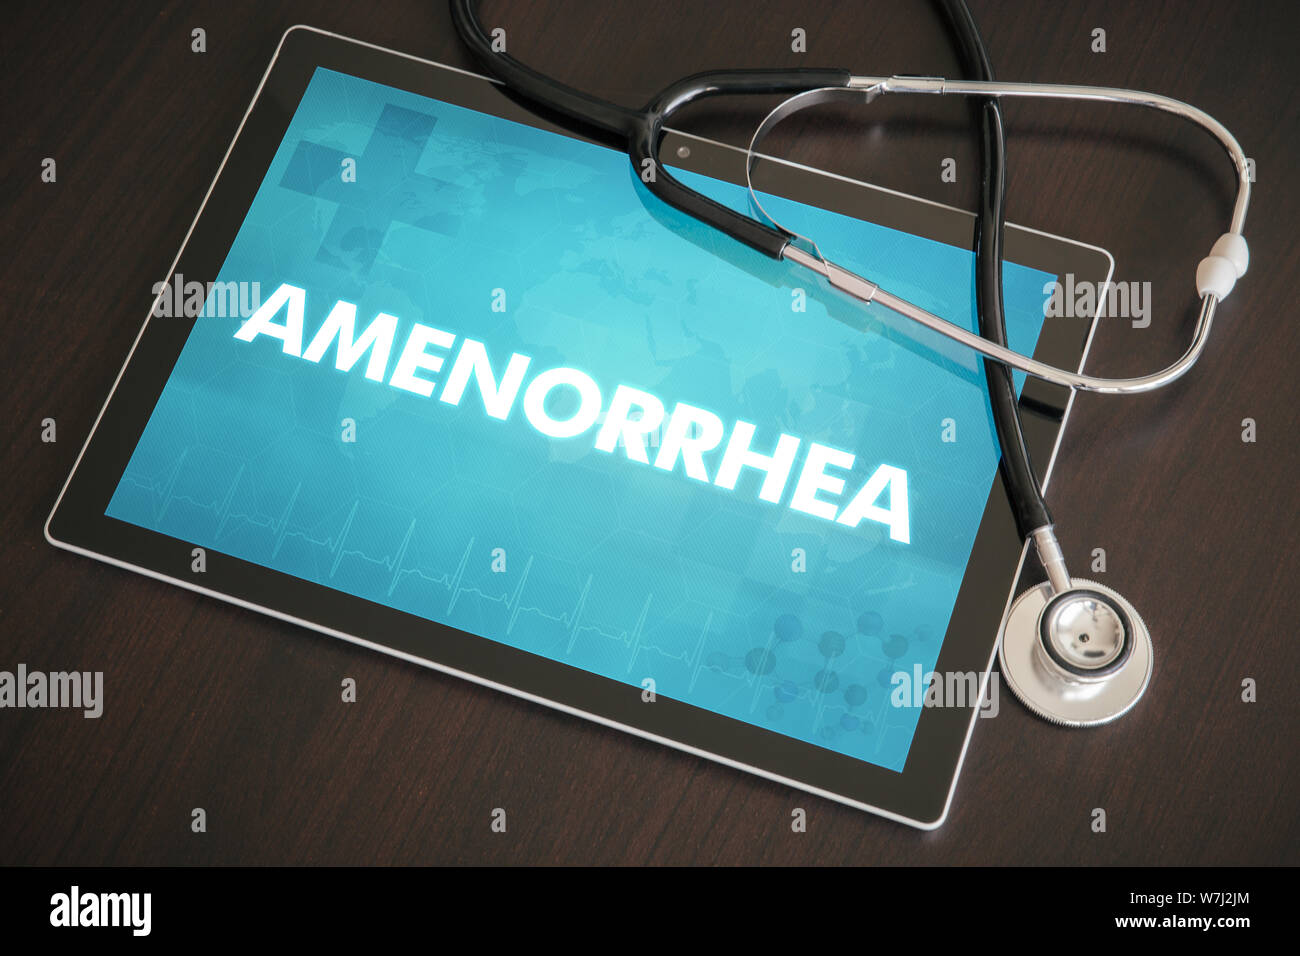 Amenorrhea (endocrine disease) diagnosis medical concept on tablet screen with stethoscope. Stock Photo